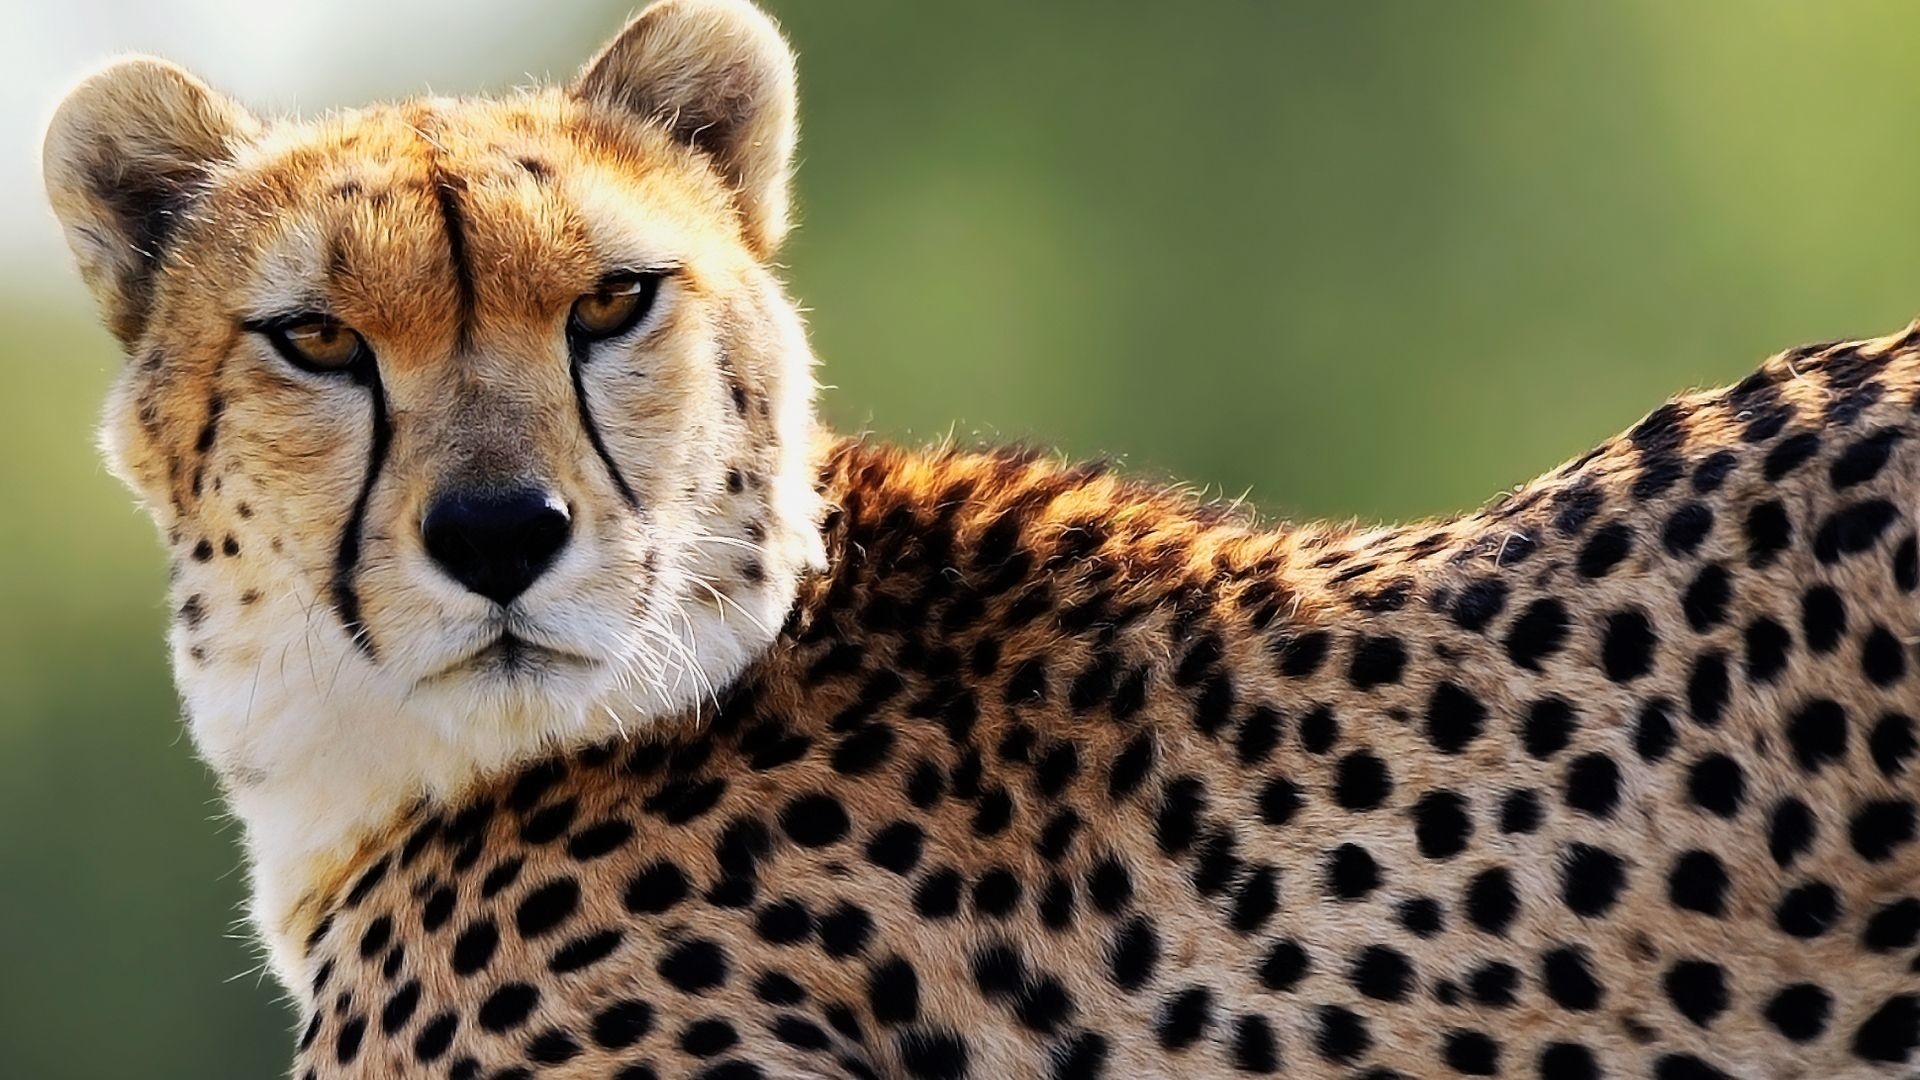 Cheetah wallpapers, Variety of styles, Beautiful and exotic, Stunning background, 1920x1080 Full HD Desktop